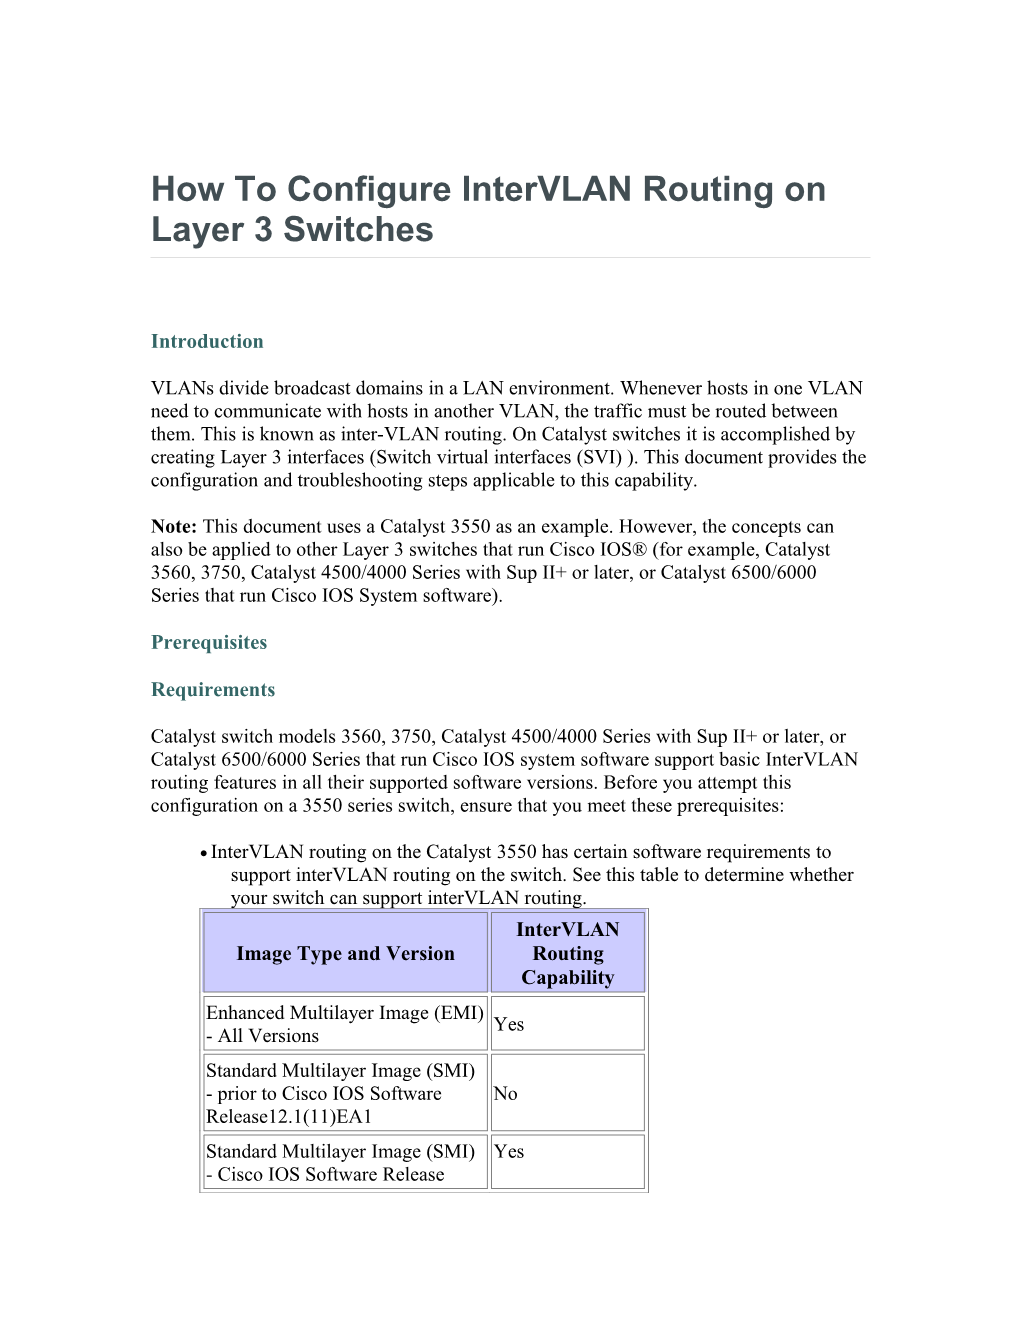 How to Configure Intervlan Routing on Layer 3 Switches